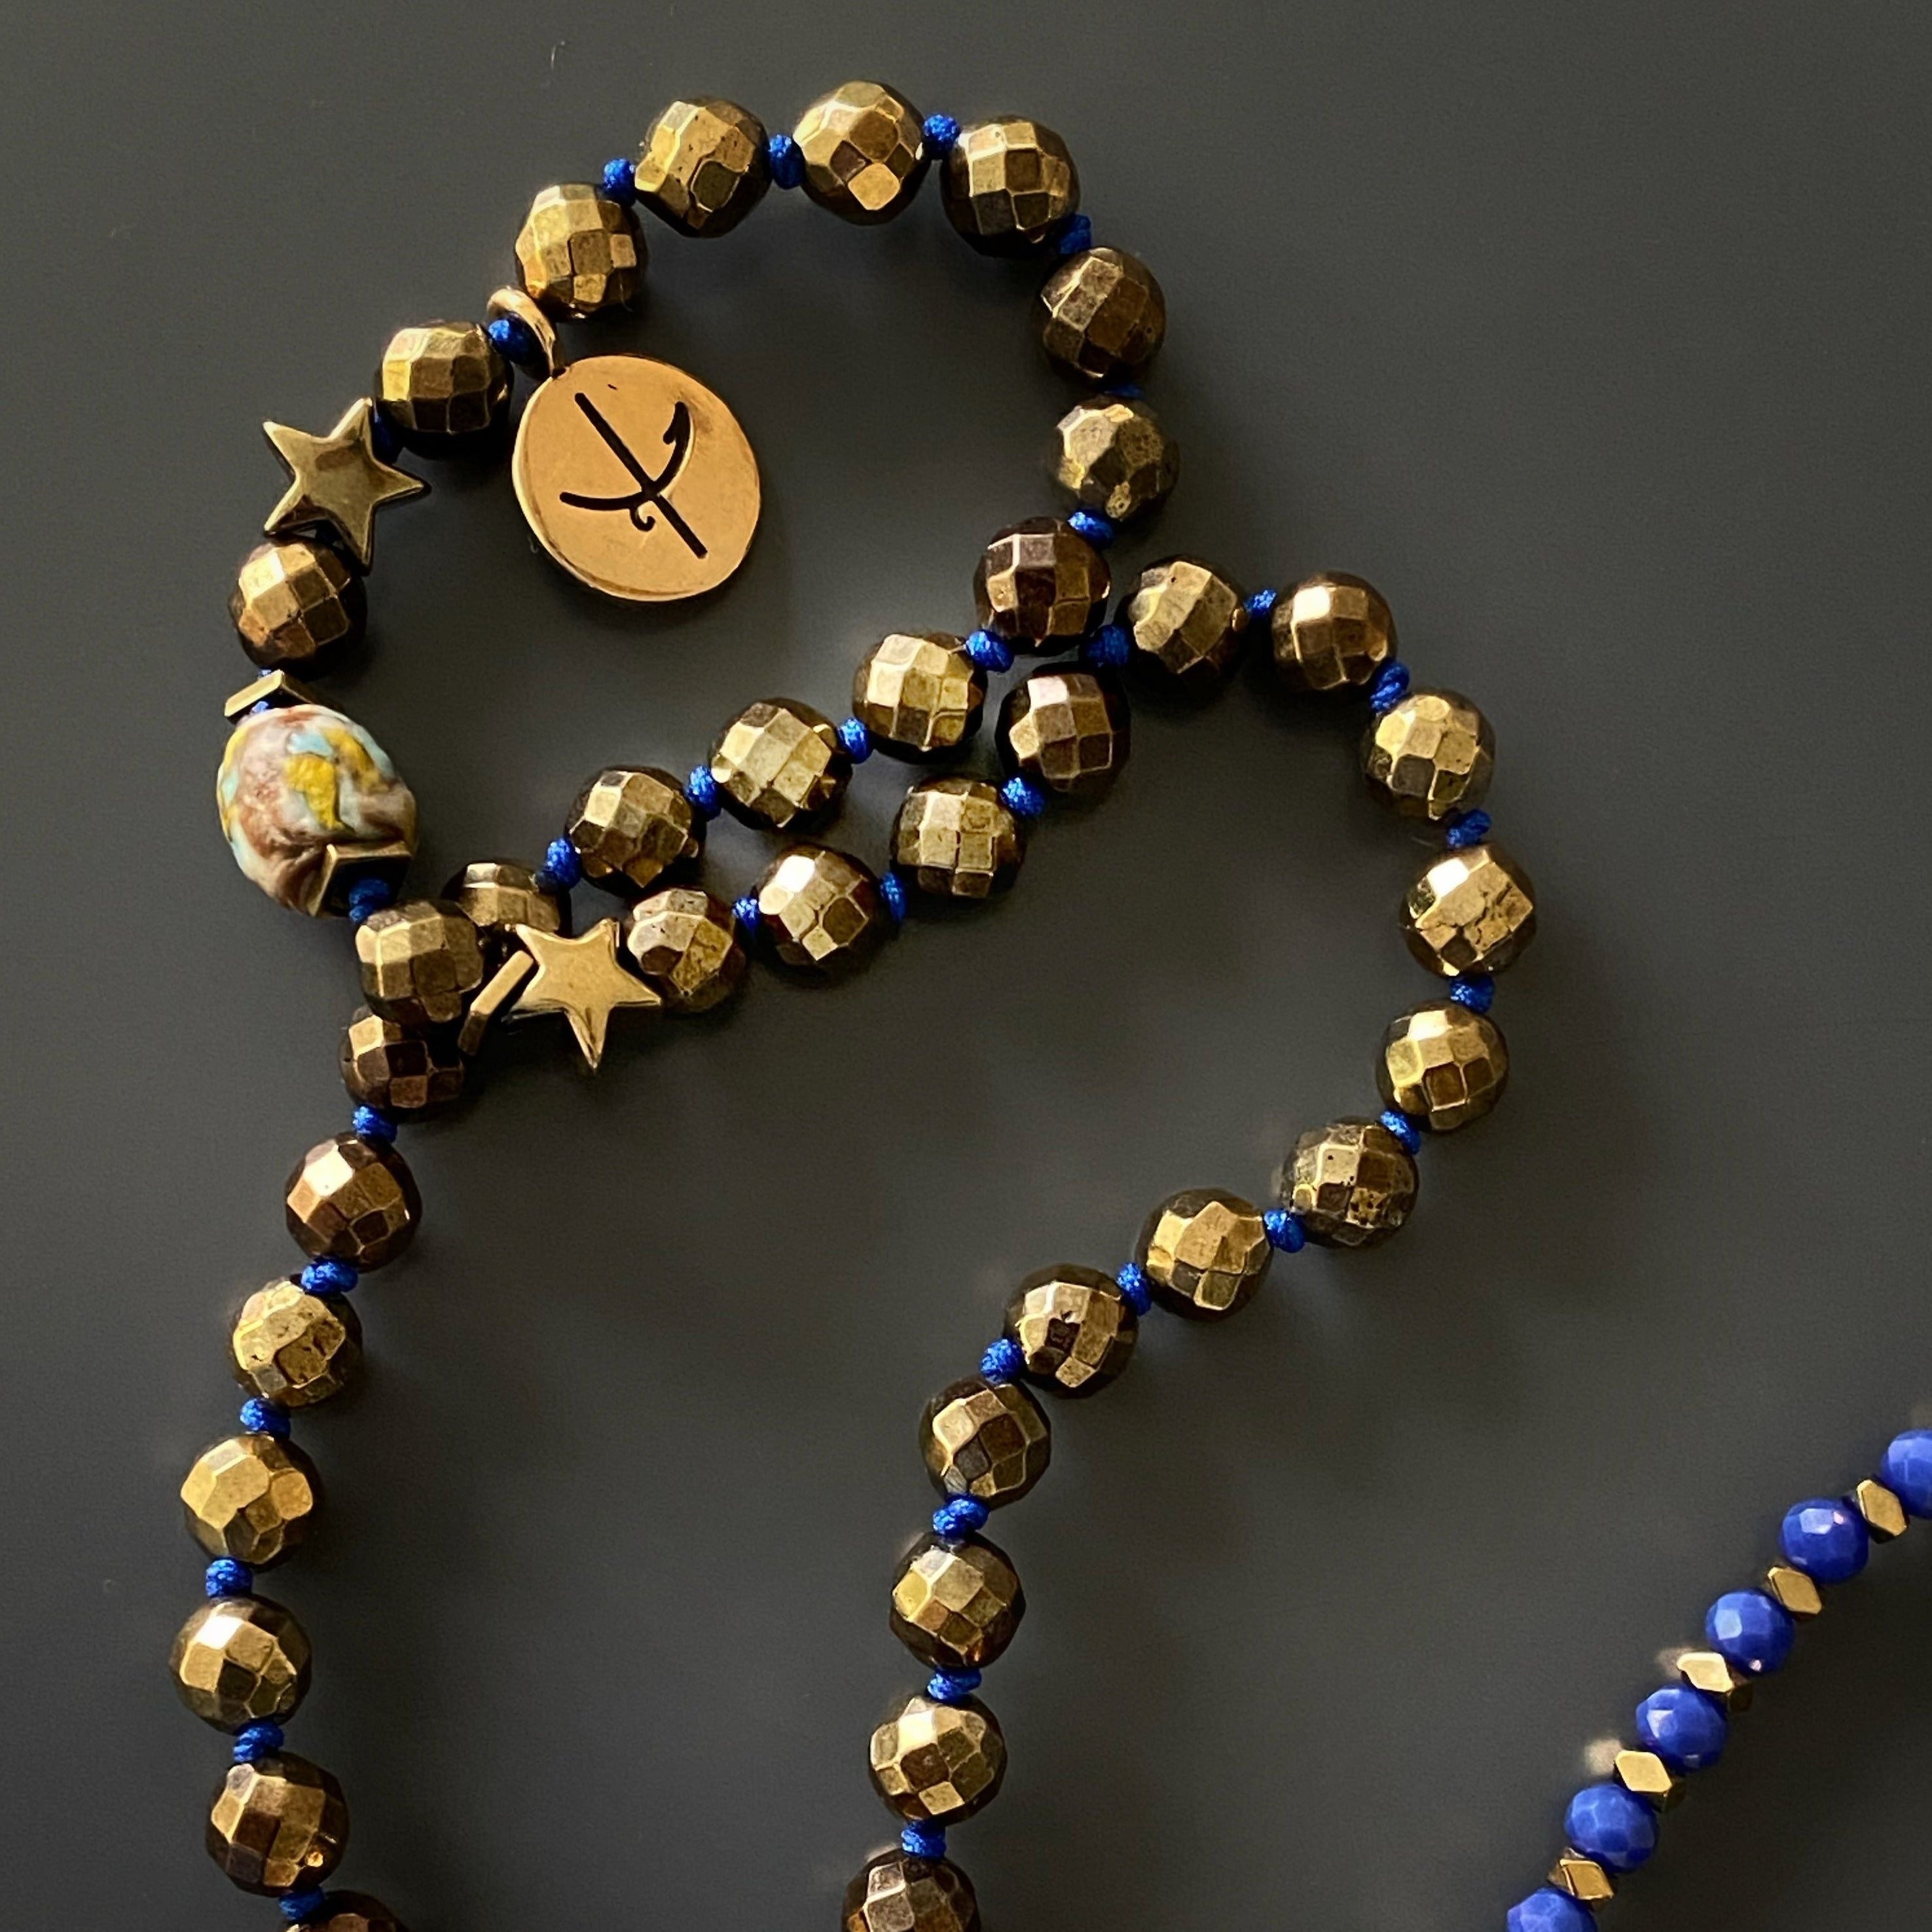 Handcrafted Isis Necklace - Elegant necklace adorned with blue crystal beads, gold hematite stones, and a handcrafted bronze pendant of the Egyptian Goddess Isis, representing healing and empowerment.